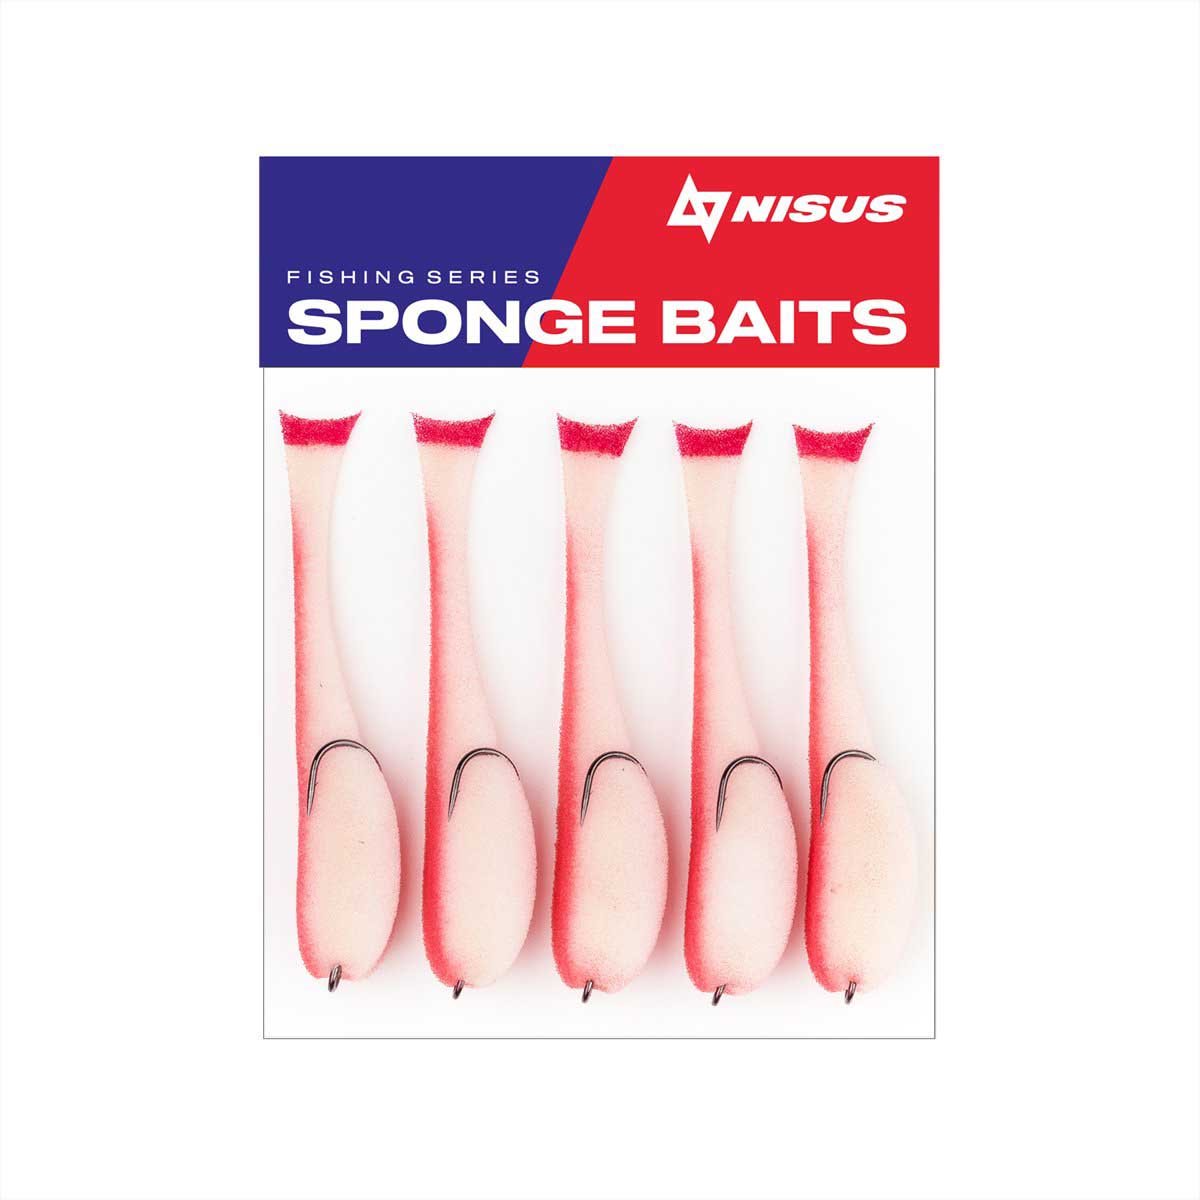 5 Sponge Bait with A Double Hook for Predatory Fish, Multi-Colored, 5 Pcs, Yellow&Red